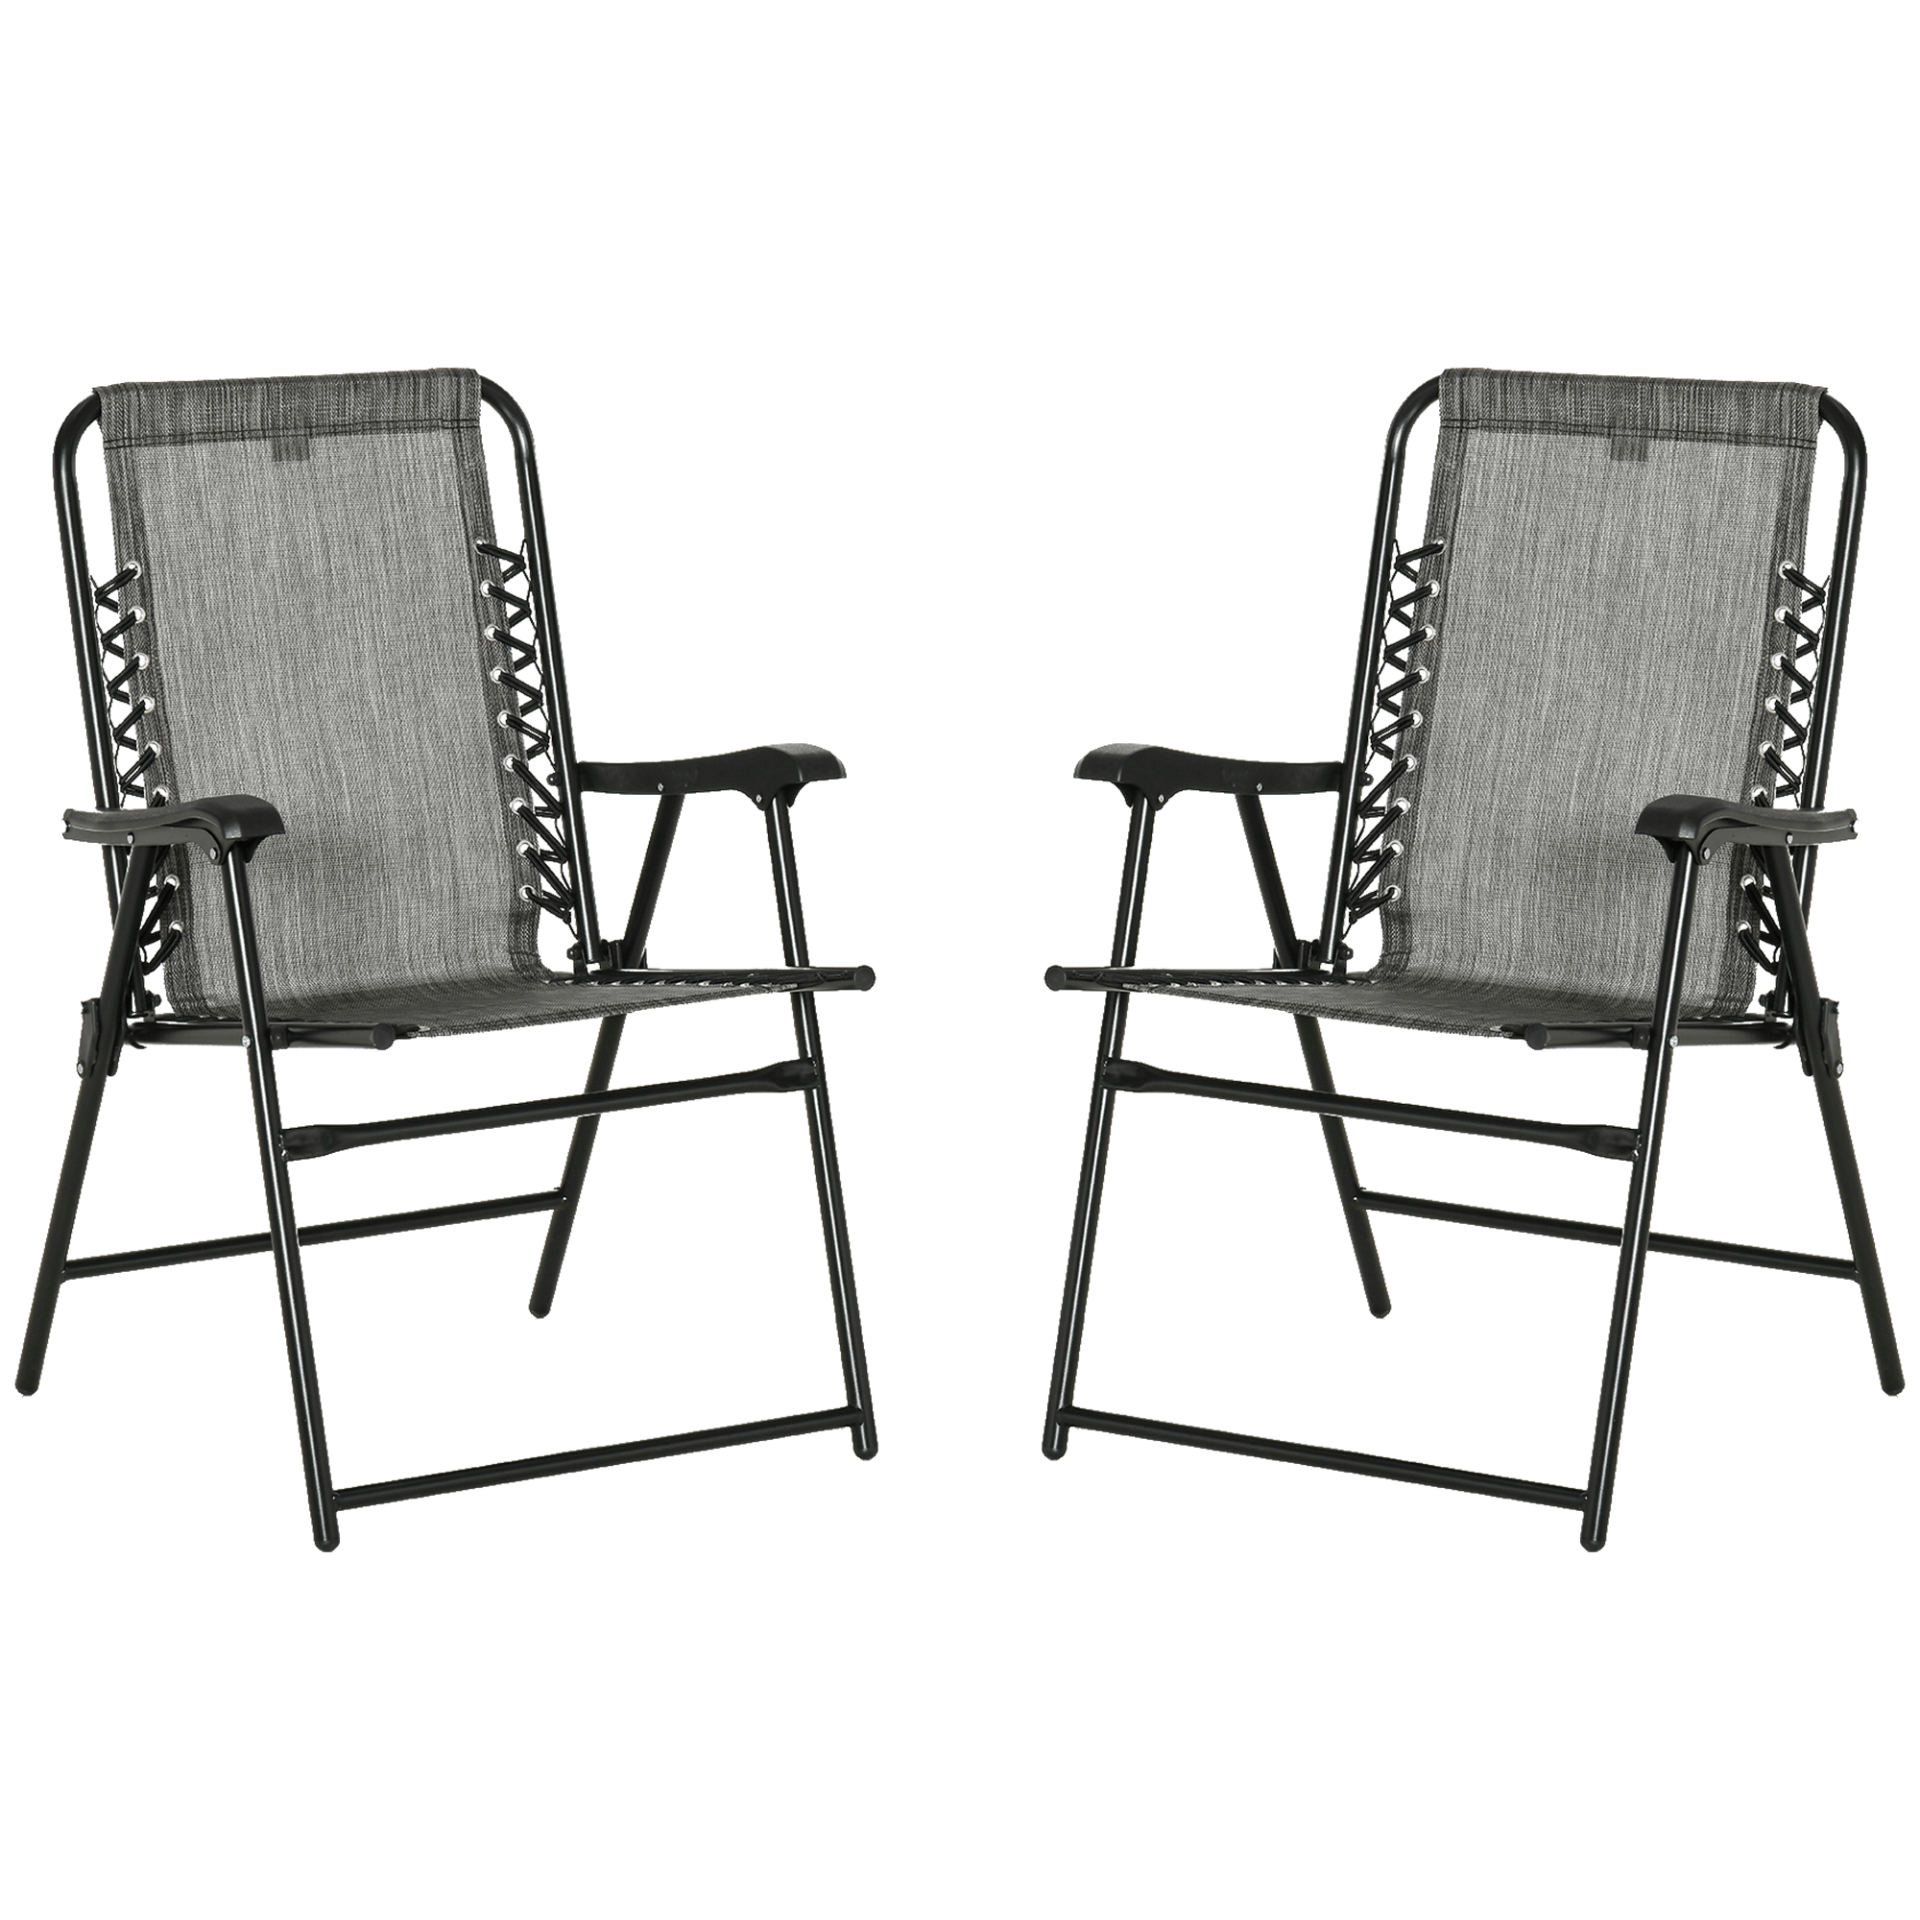 Outsunny Set of 2 Patio Folding Dining Chair Set Garden Outdoor Portable for Camping Pool Beach Deck Lawn with Armrest, Grey - Comfortable, Stylish, and Portable Chairs Camping Chair Cosy Camping Co. Grey  